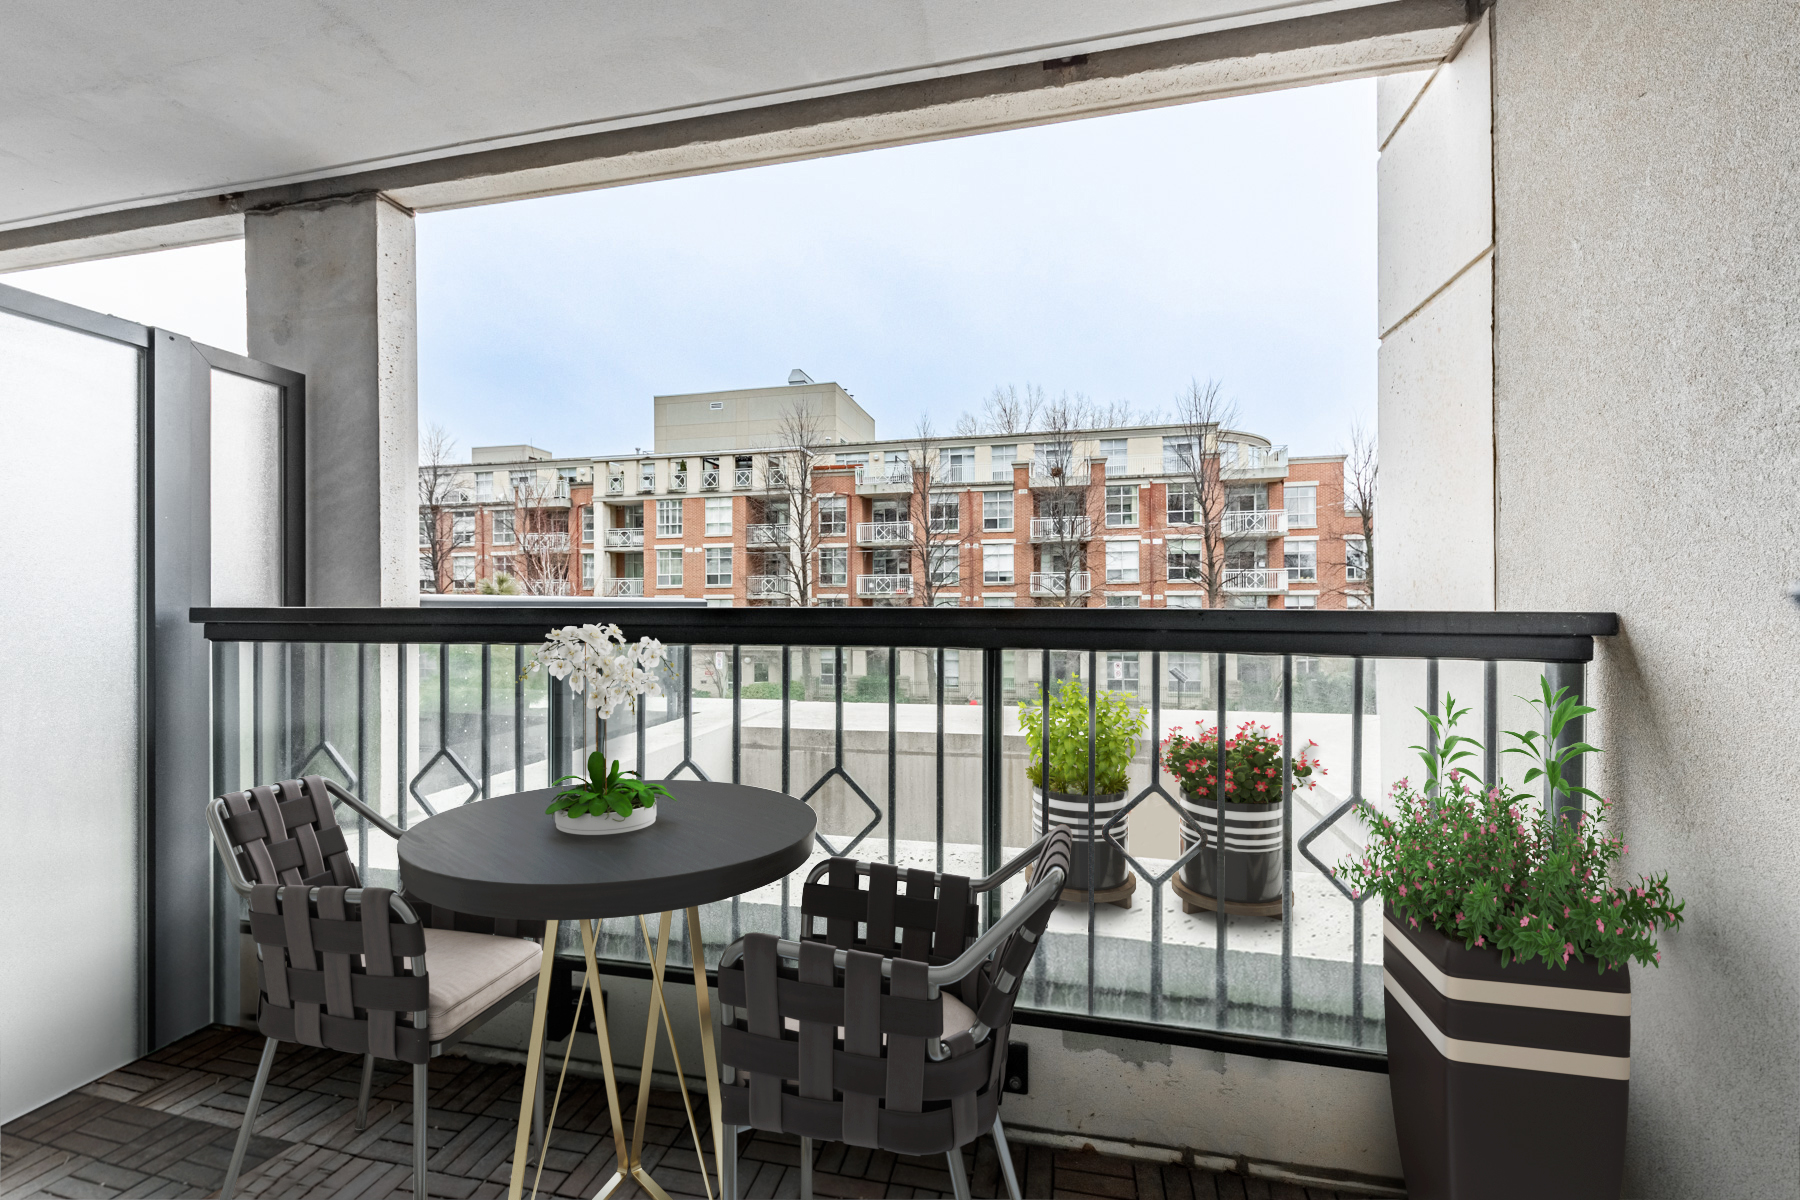 Condo balcony with 3D rendered patio table and chairs.